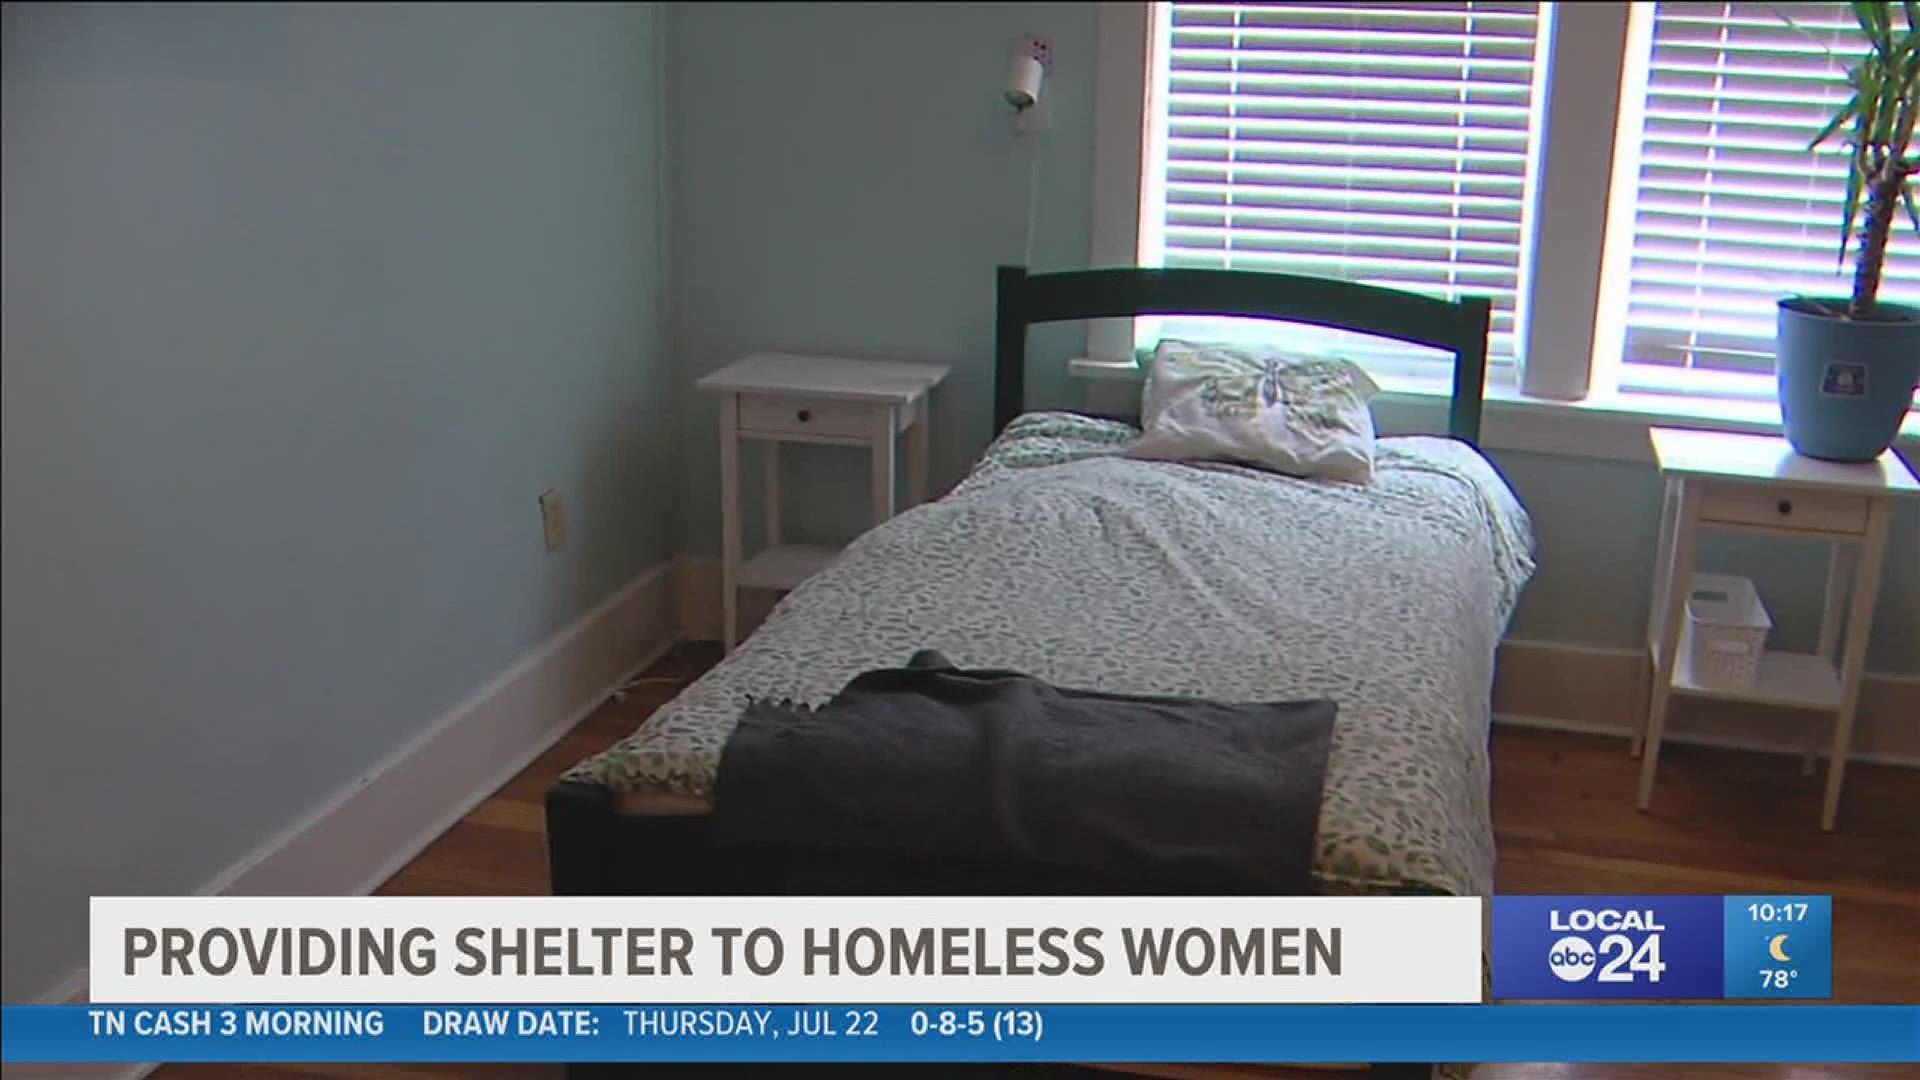 “Only 6% of our shelter beds in the city our designated for women yet they make up 37% of the homeless population."